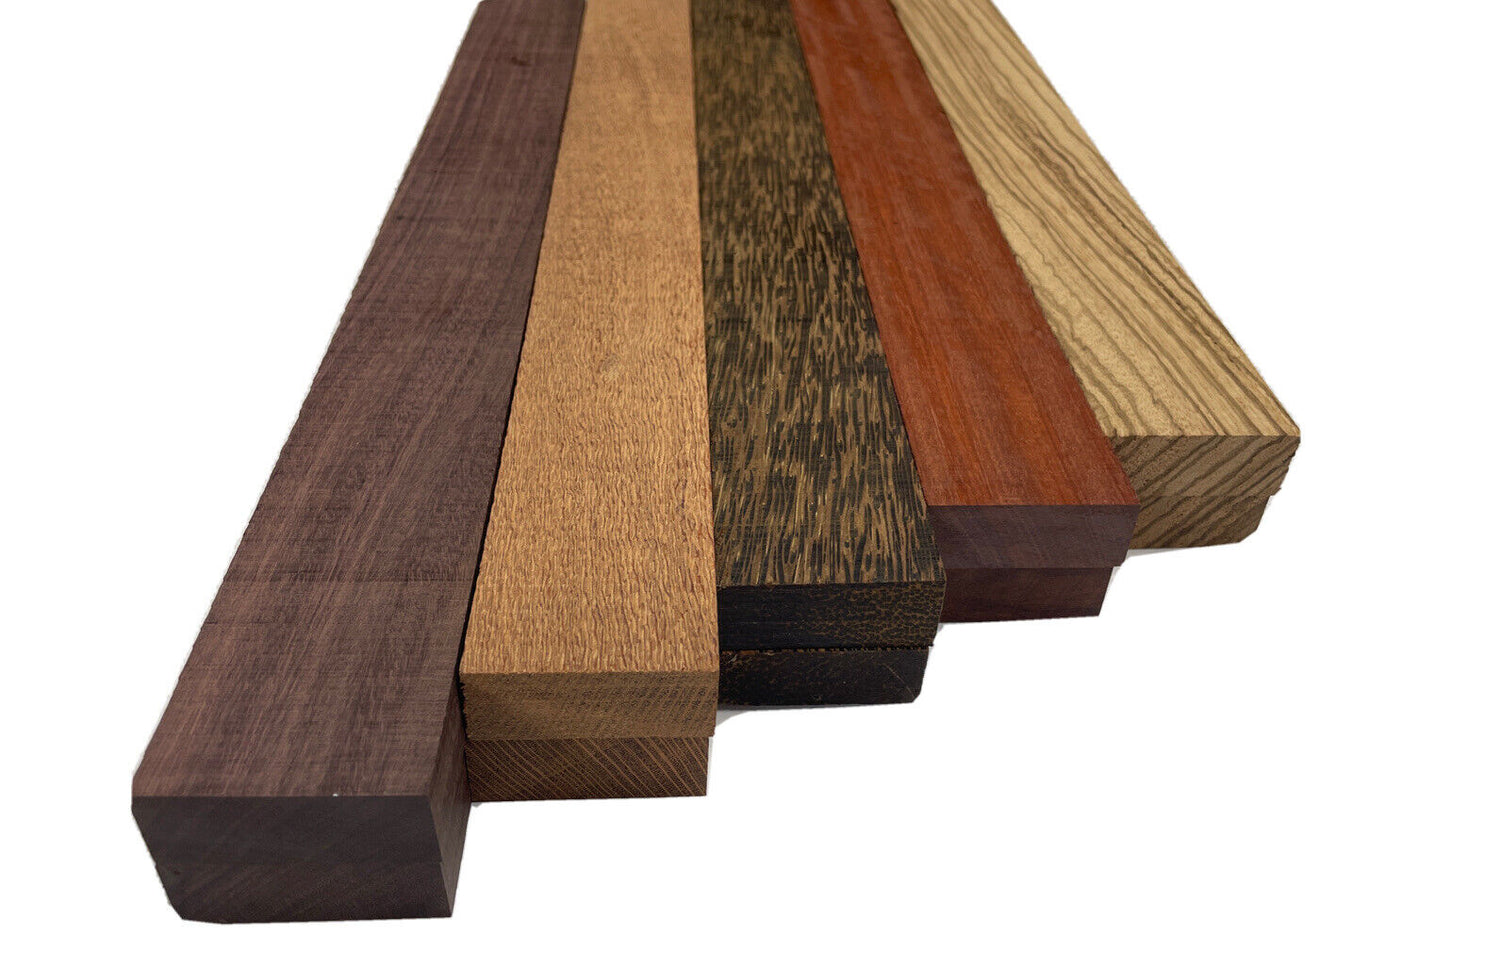 Combo Pack Of 10, 5 Species, Cutting Boards/Thin Dimensional Lumber (Katalox,Leopardwood,Black Palm,Bloodwood,Zebrawood ) - Exotic Wood Zone - Buy online Across USA 